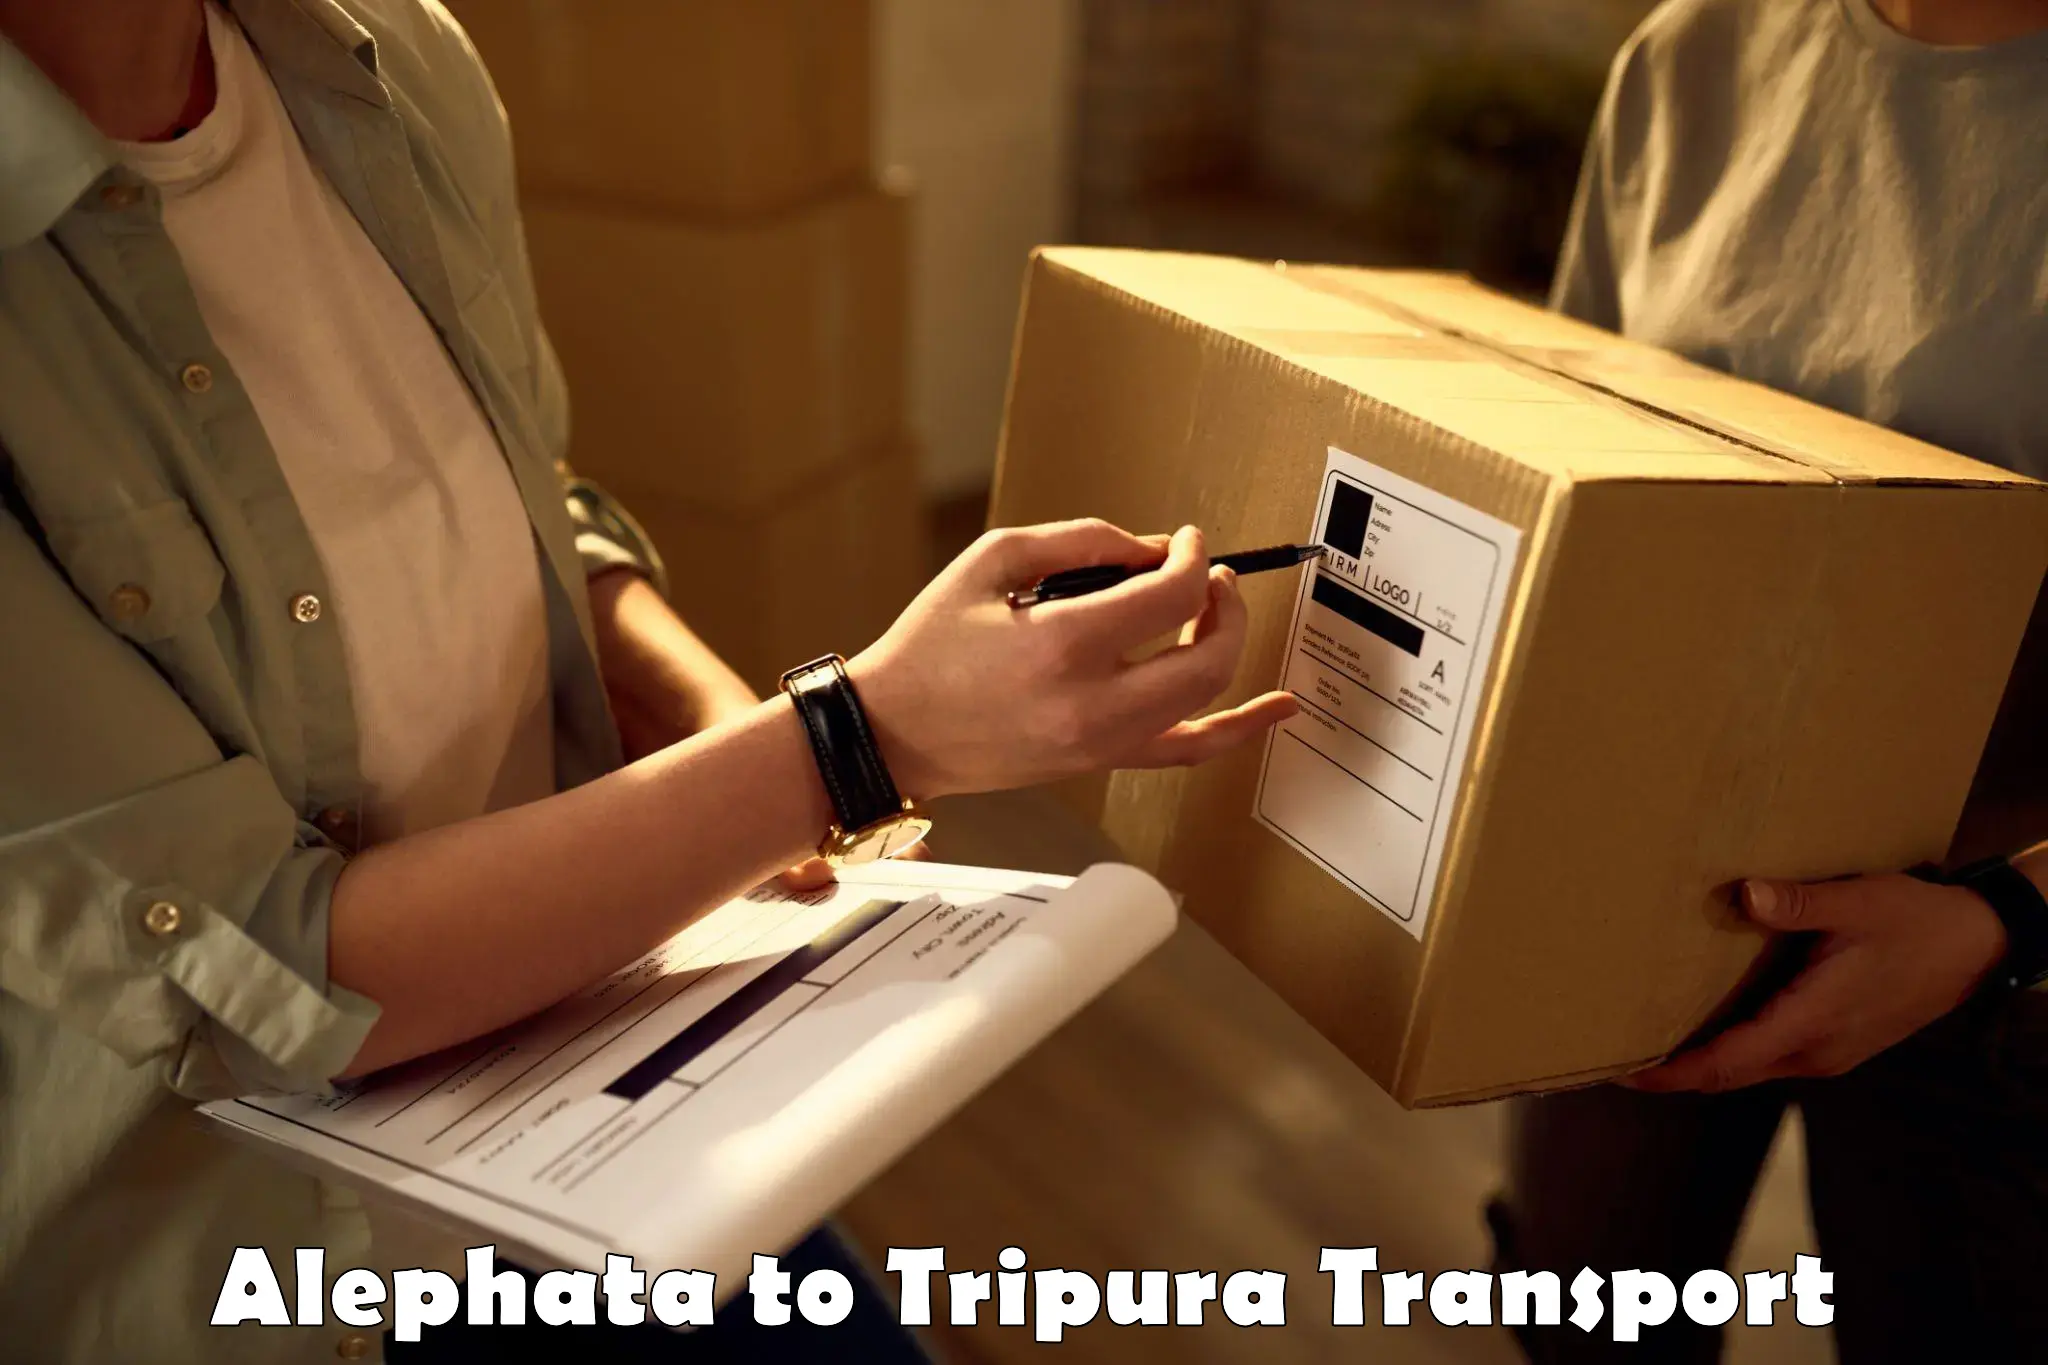 Daily parcel service transport Alephata to Udaipur Tripura